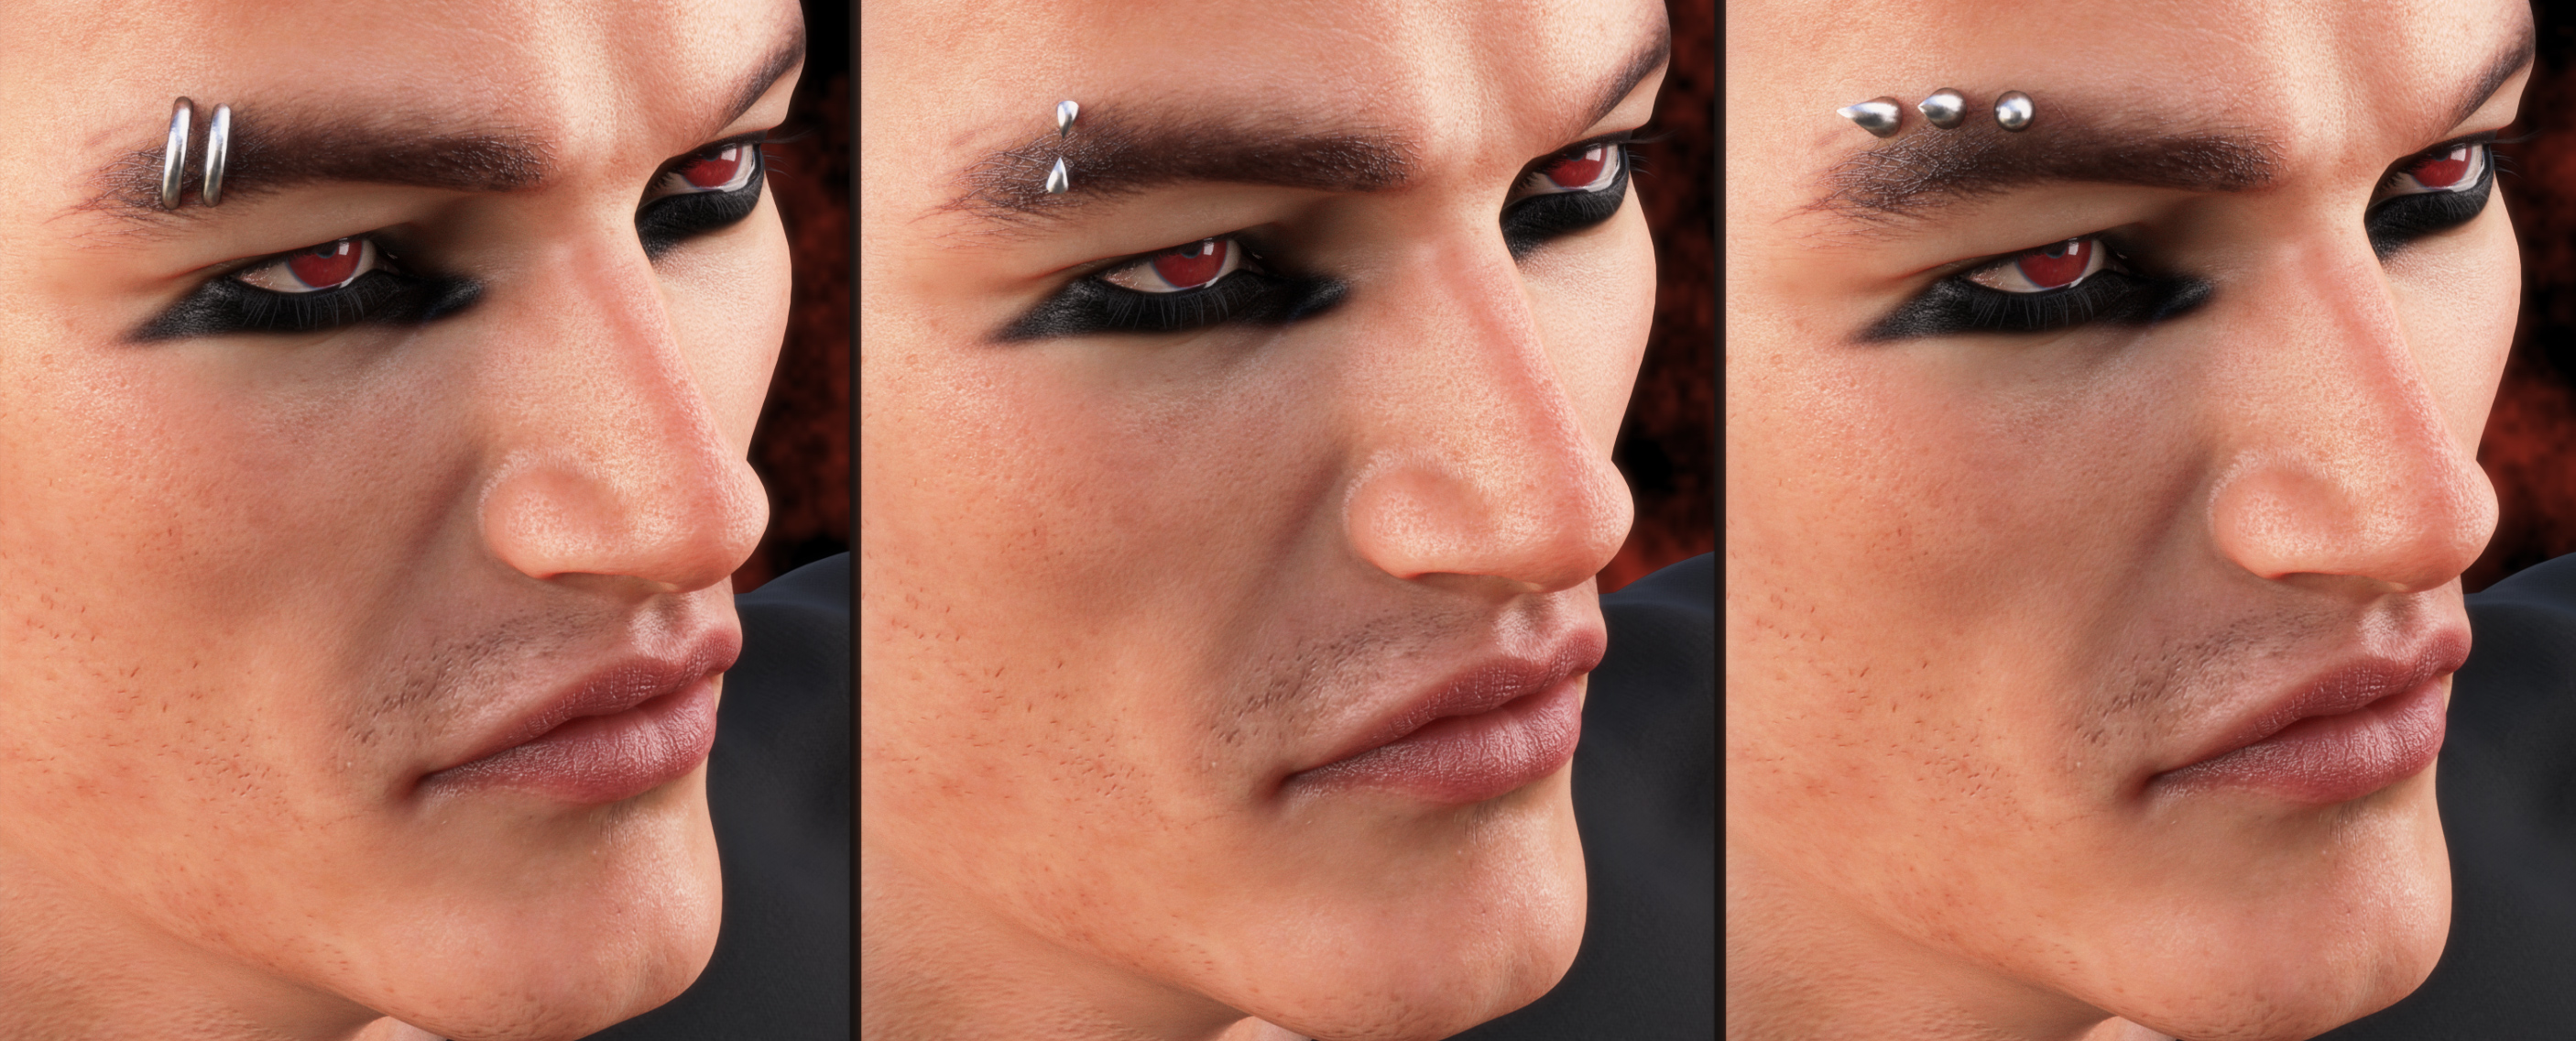 Devilish Piercing for Genesis 8 and 8.1 Males by: Neikdian, 3D Models by Daz 3D